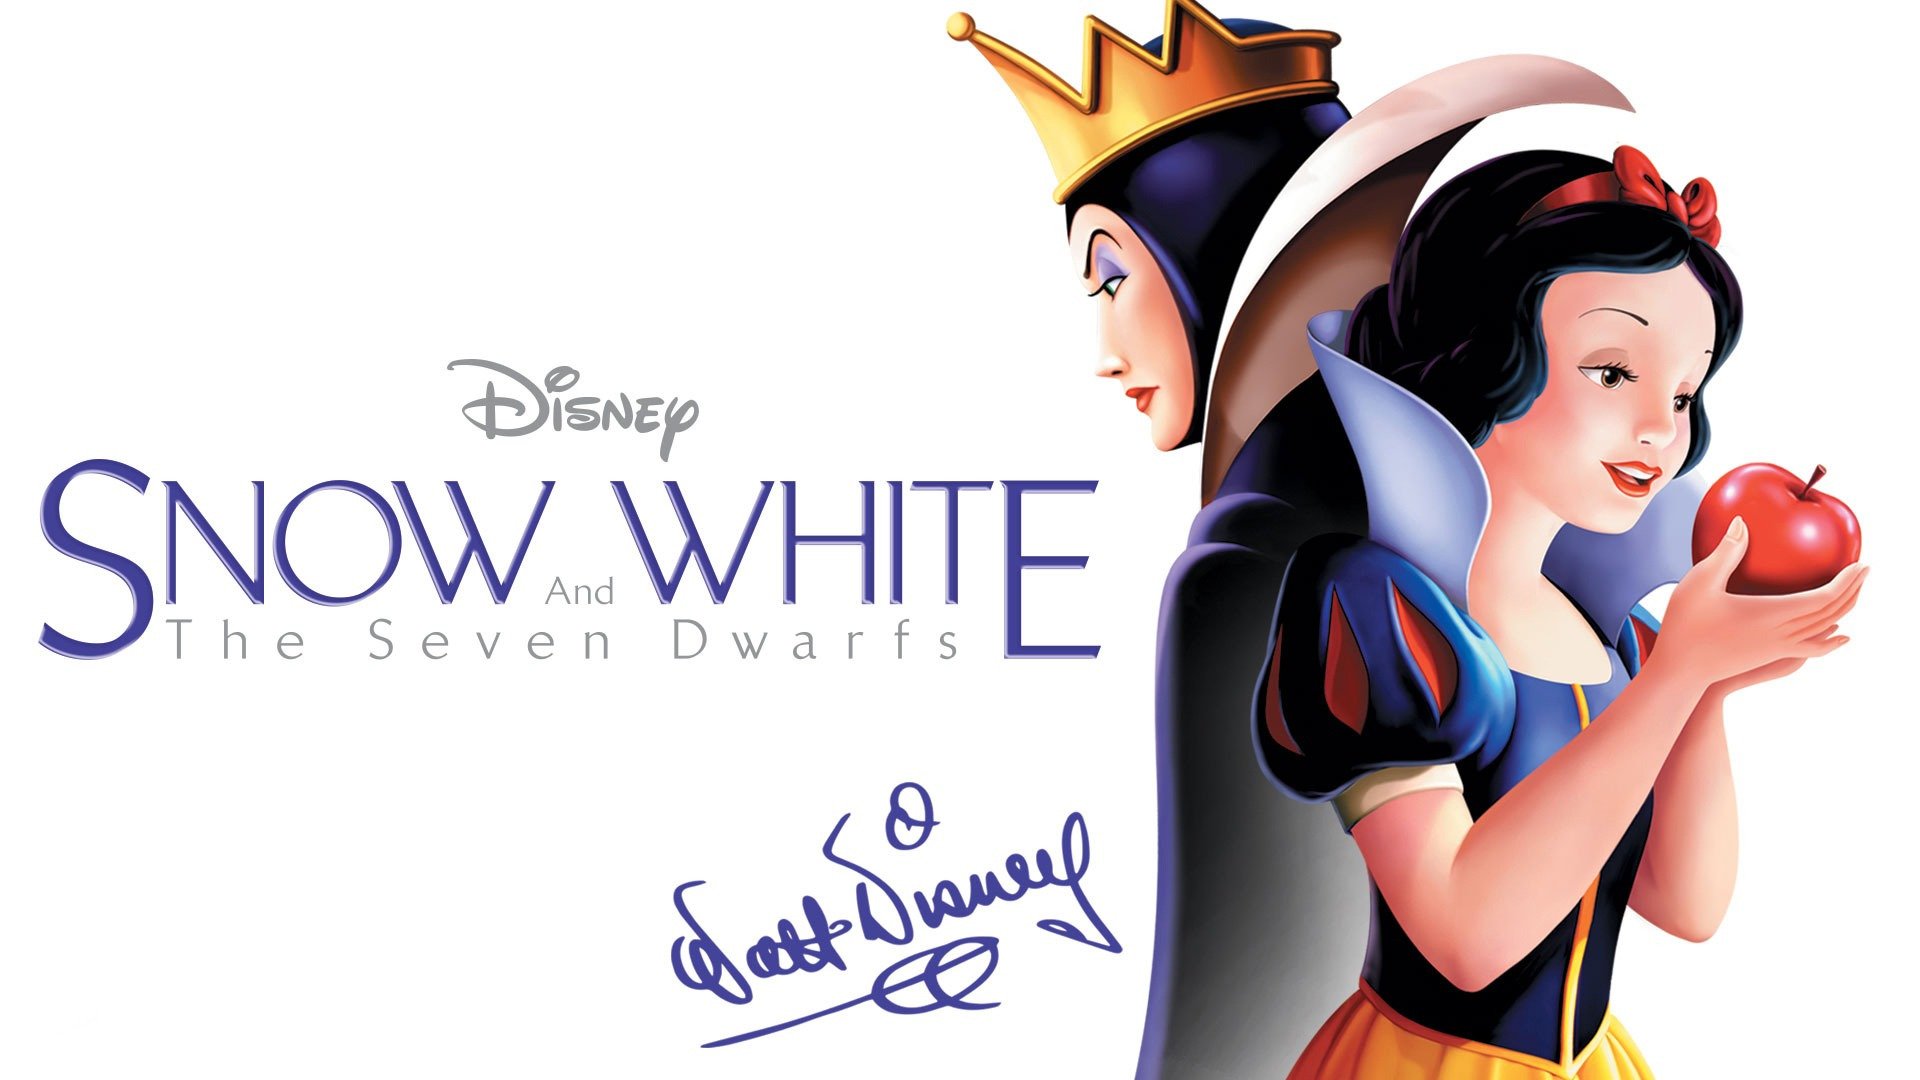 Snow White And The Seven Dwarfs Trailer 1 Trailers And Videos Rotten Tomatoes 